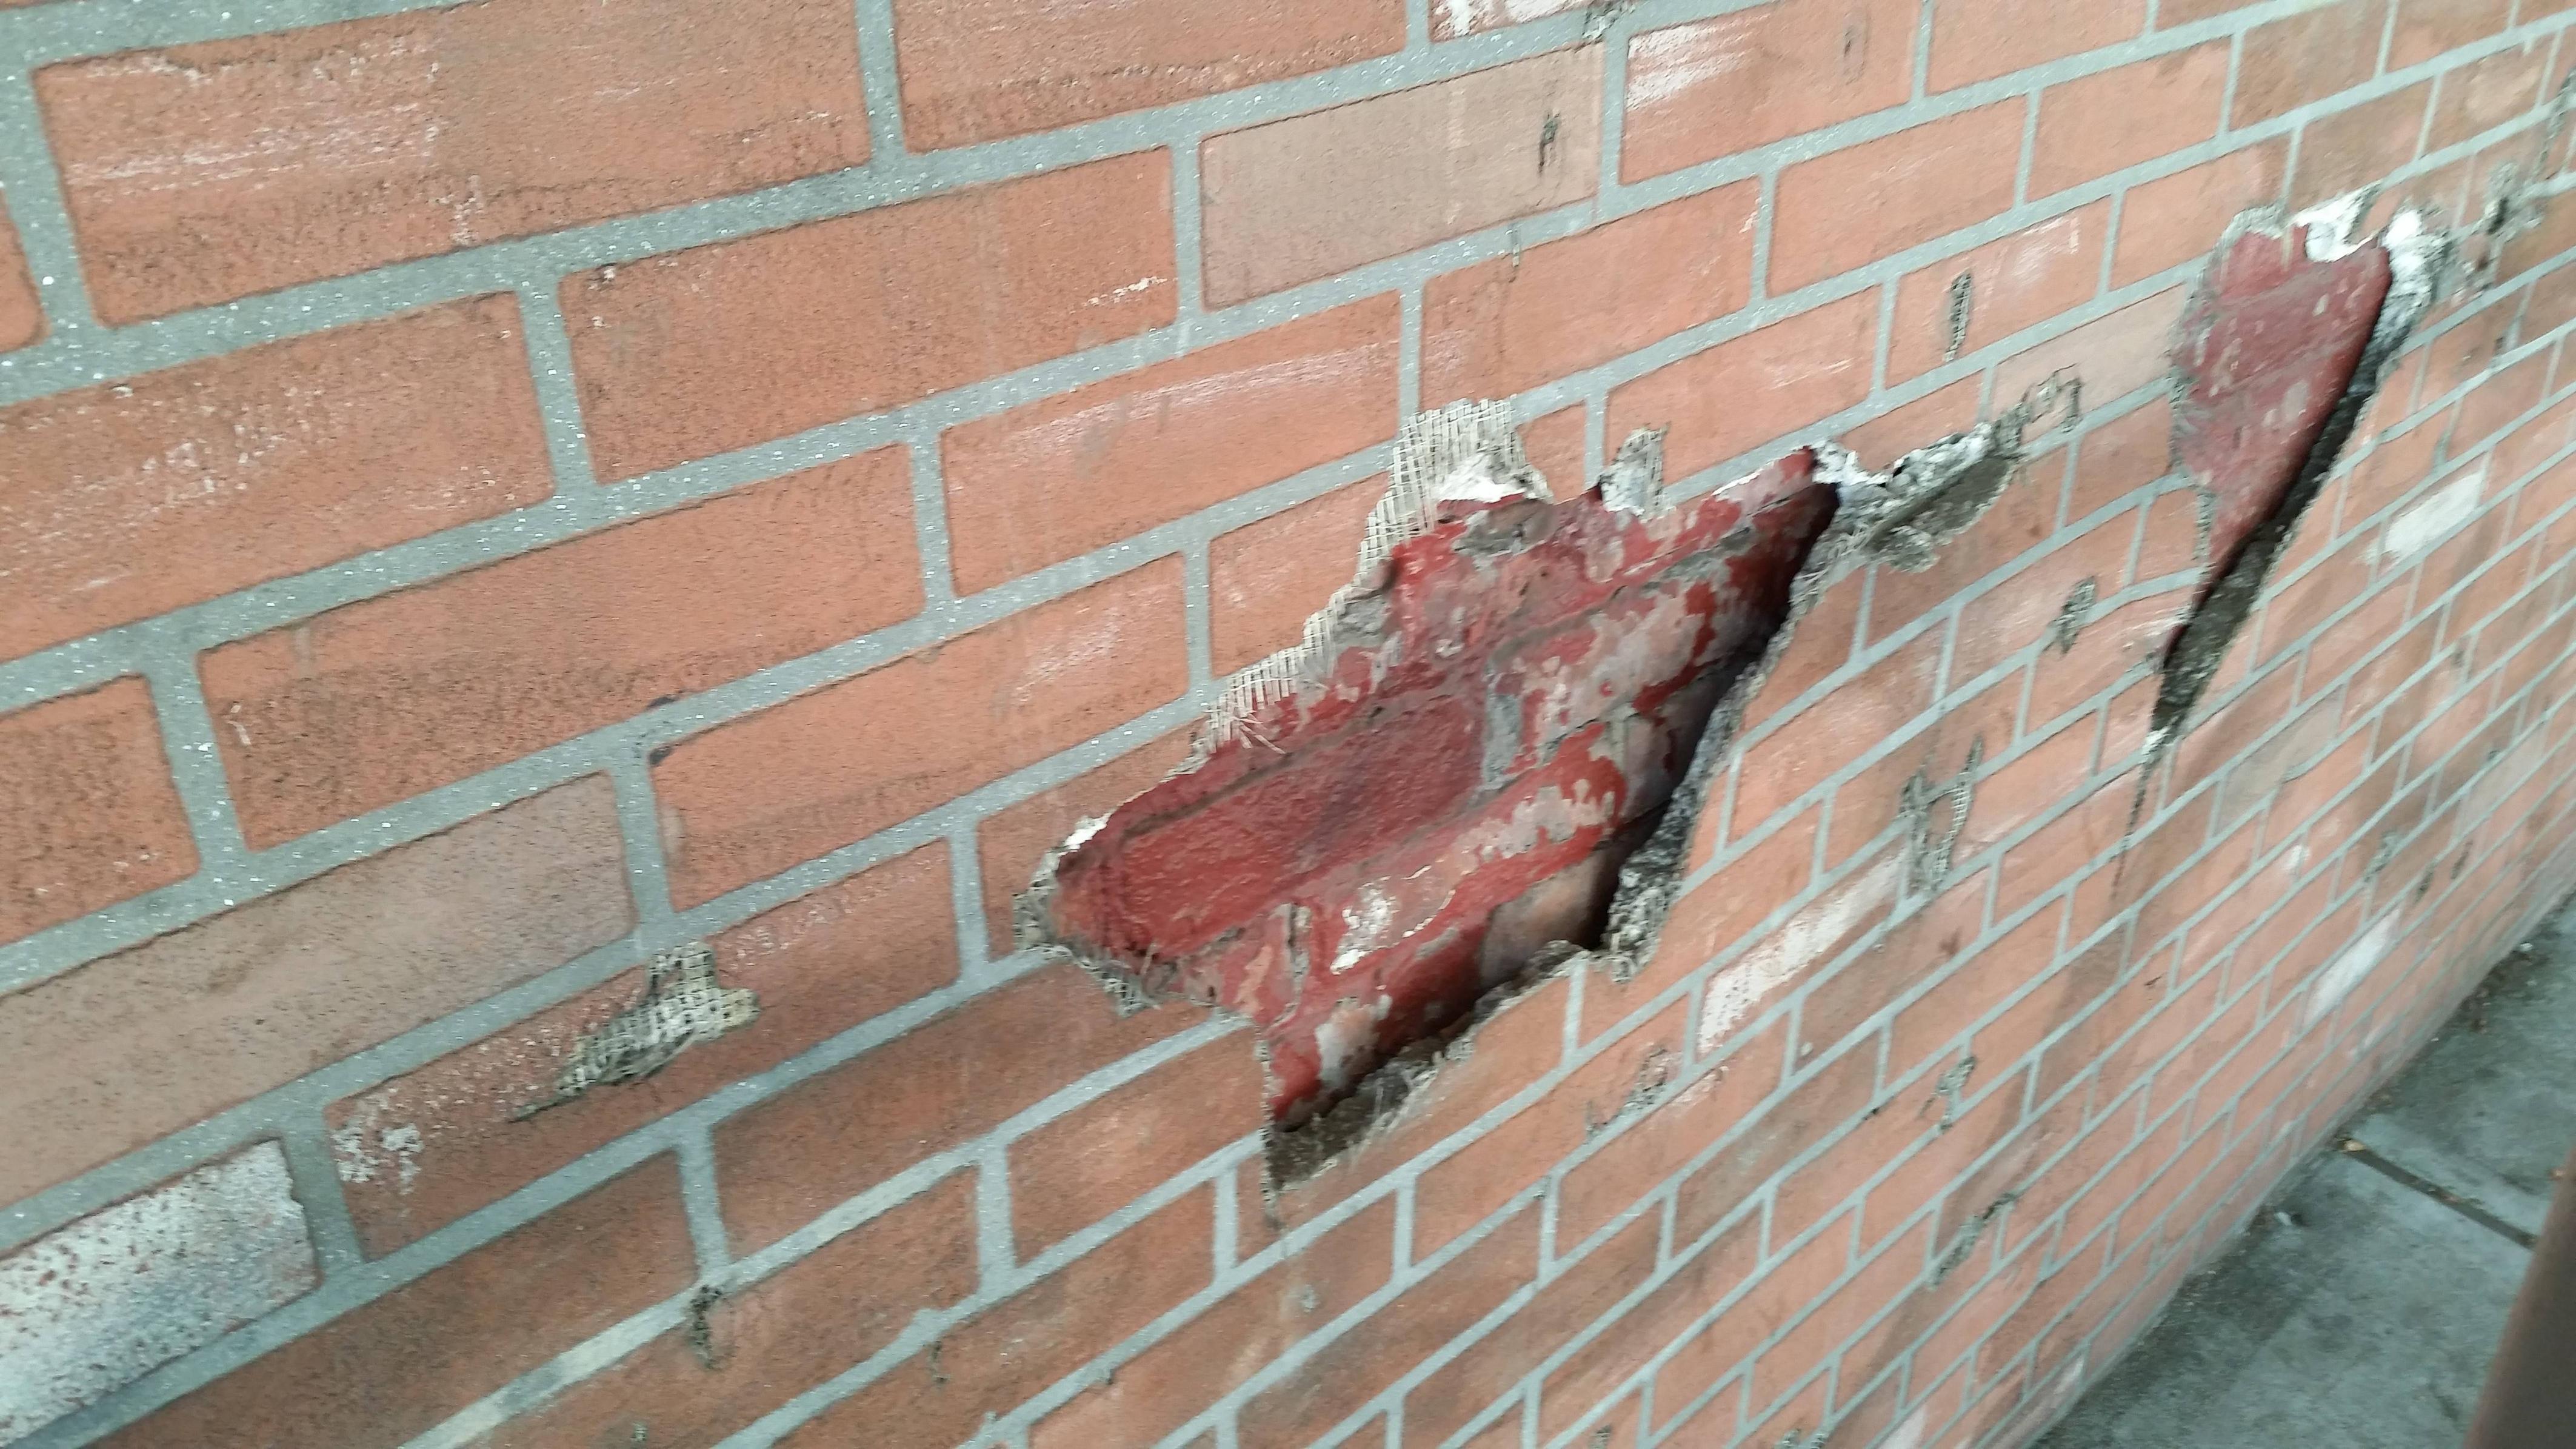 They covered real brick with fake brick.